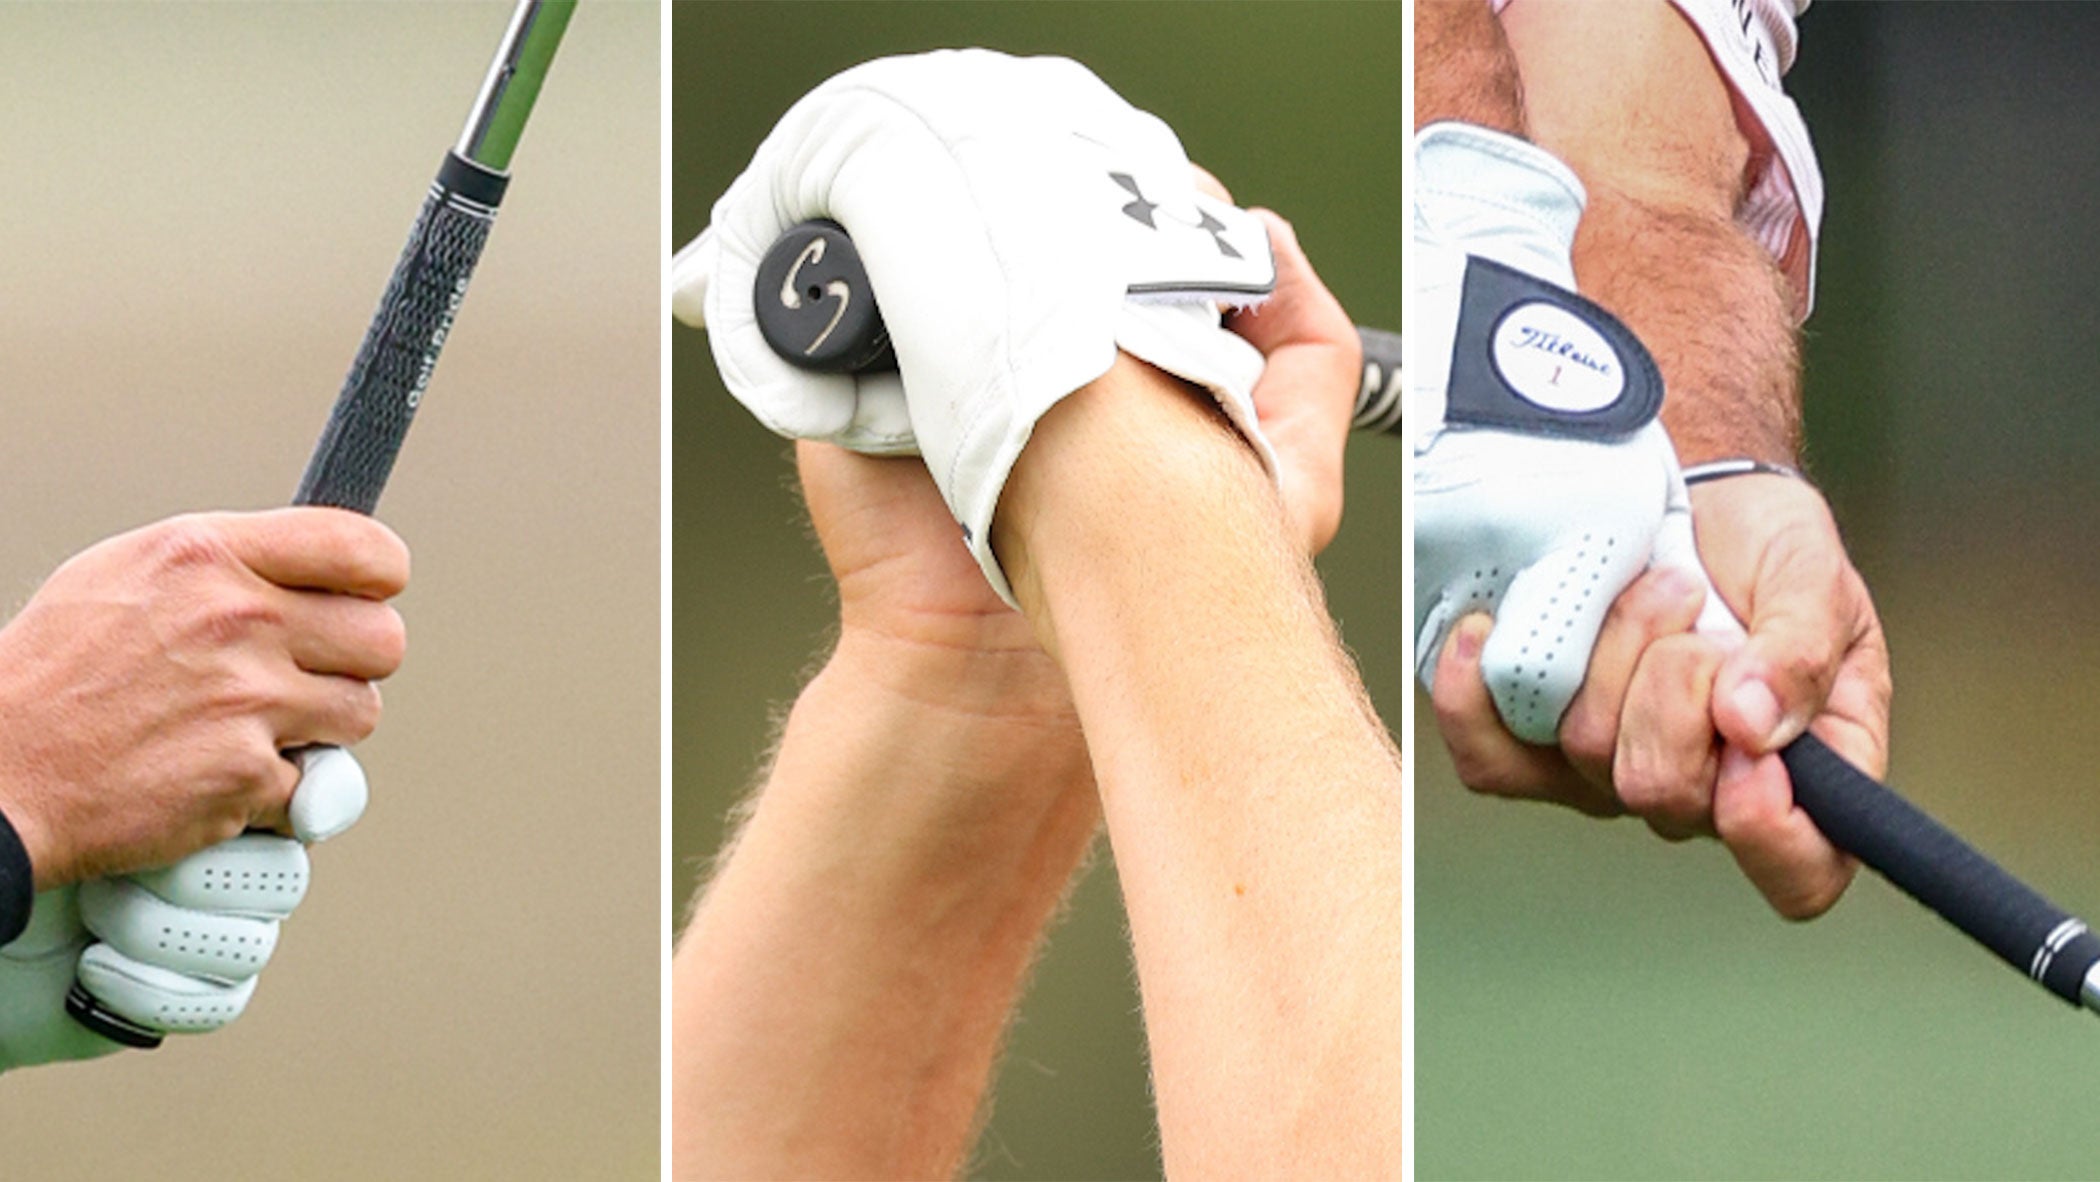 The grips of, from left, Wyndham Clark, Jordan Spieth and Brian Harman.